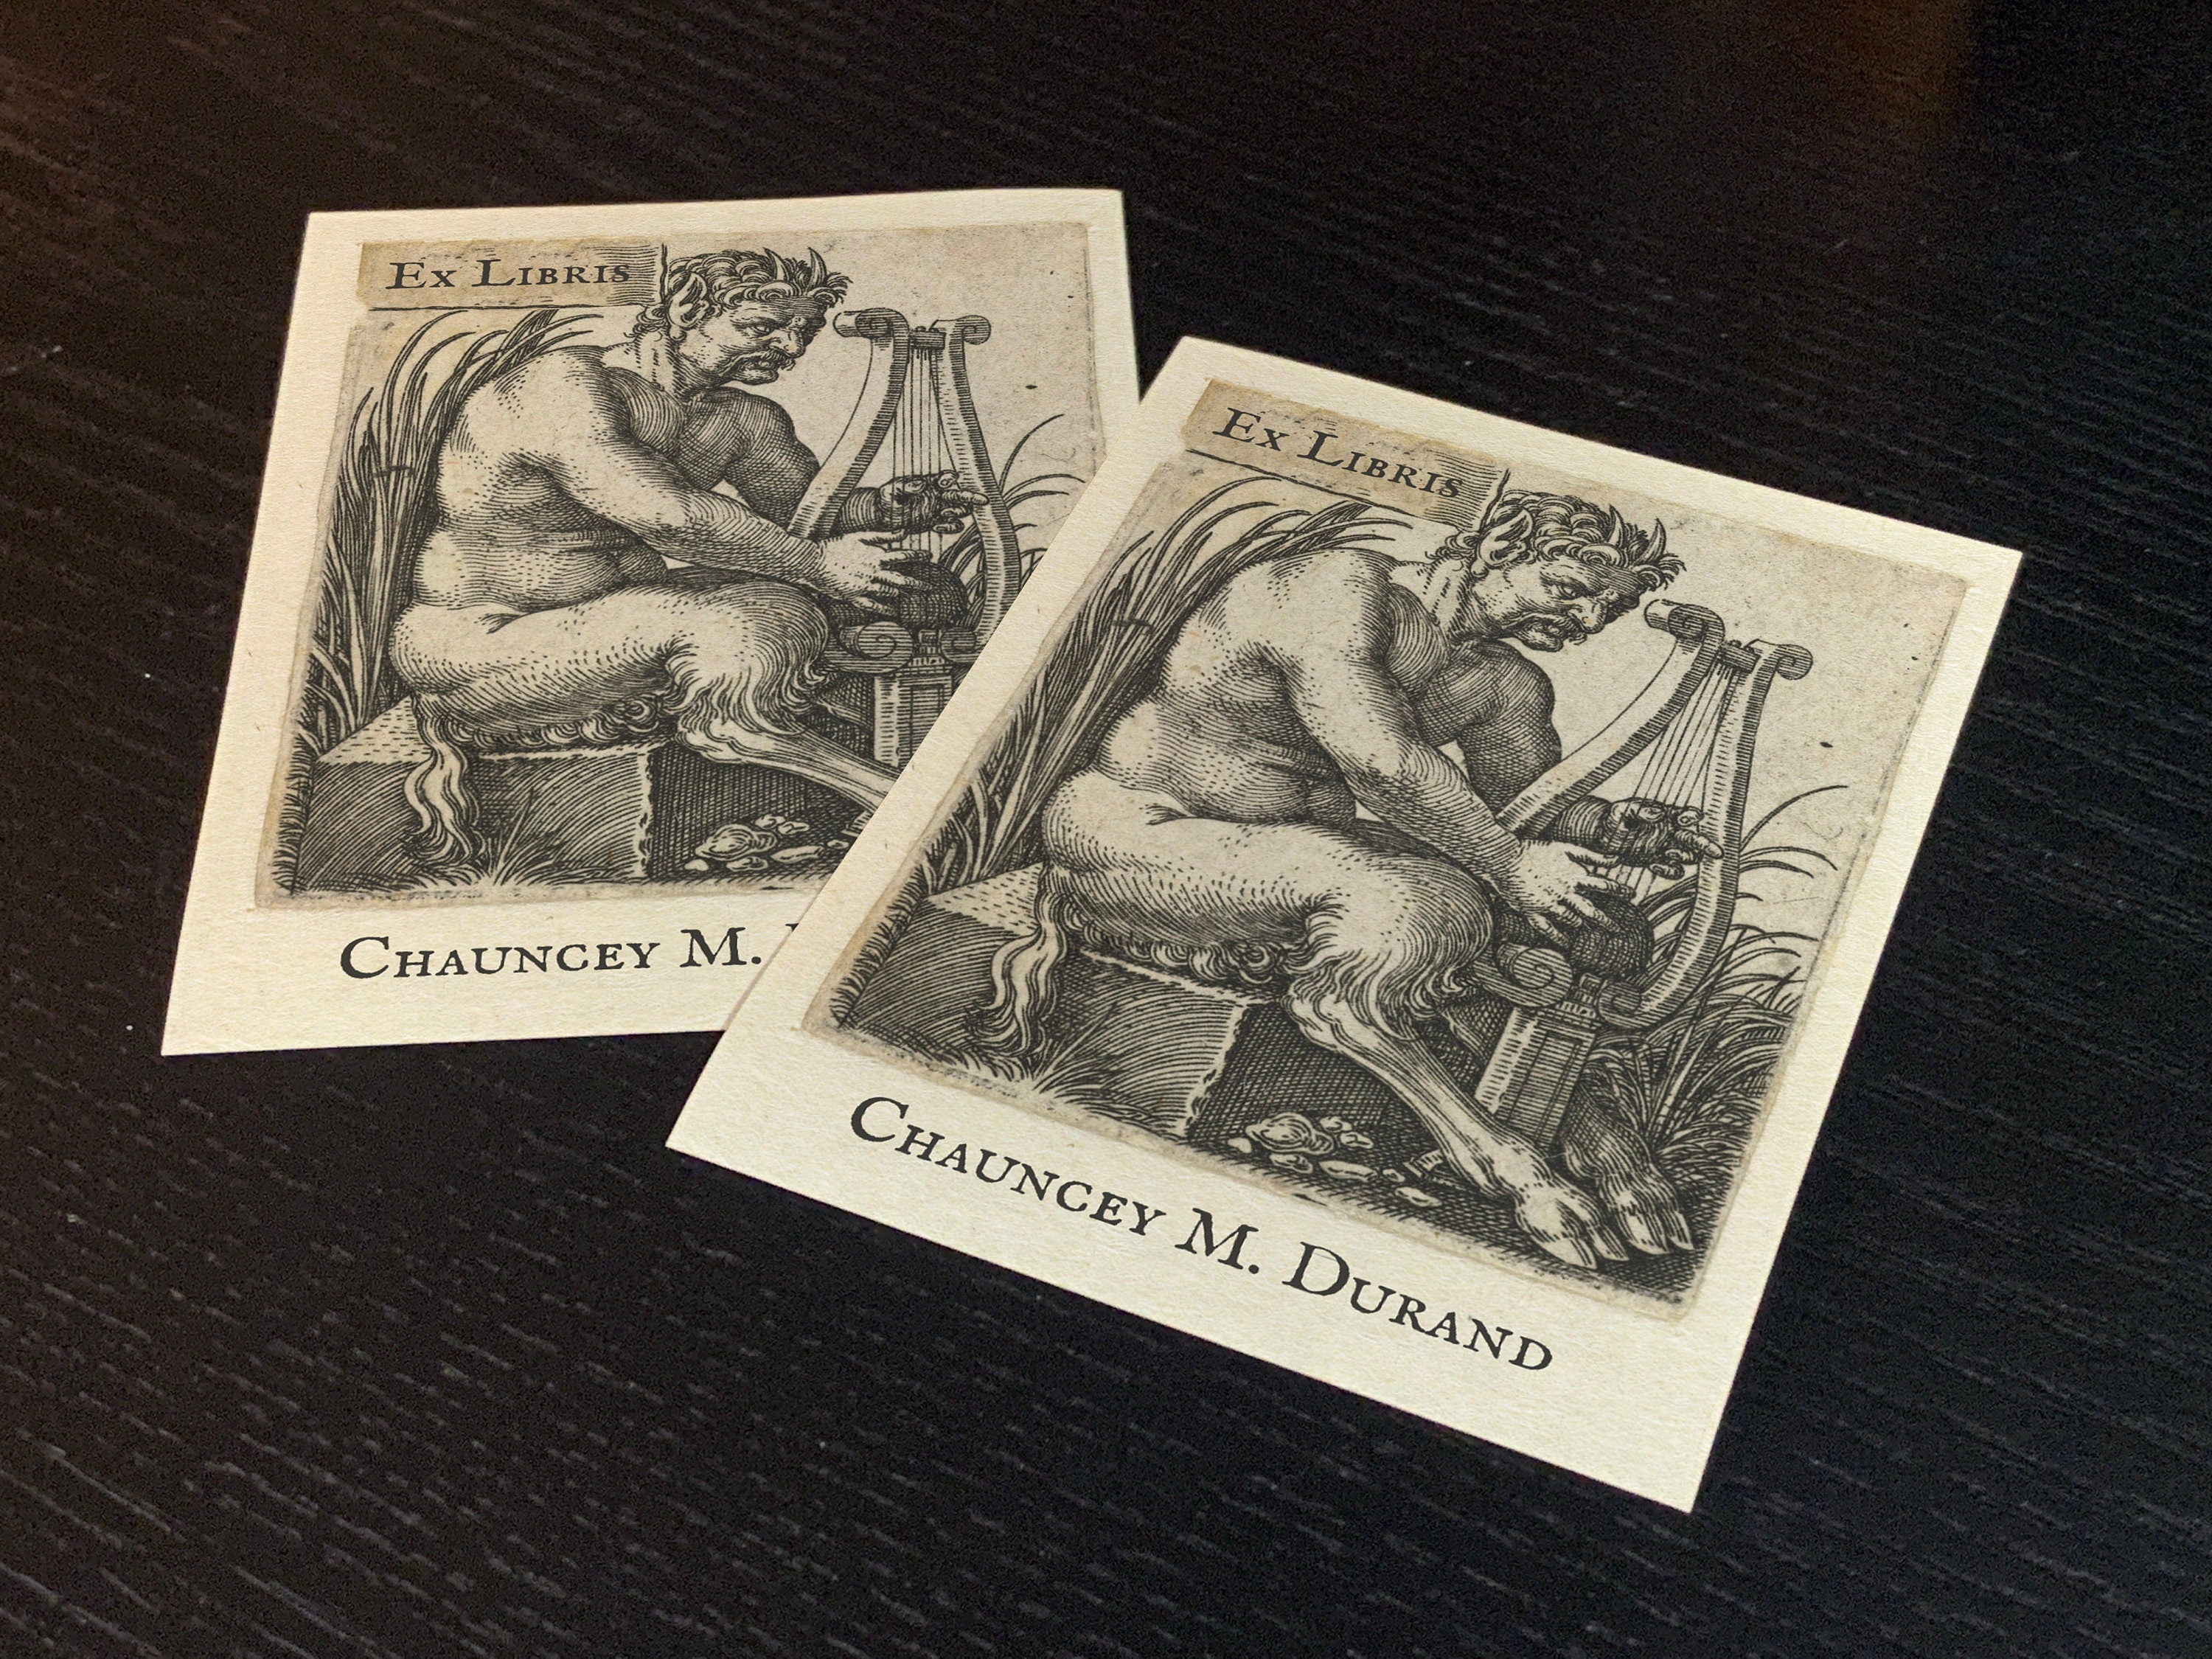 Satyr Playing Lyre, Personalized, Ex-Libris Bookplates, Crafted on Traditional Gummed Paper, 3in x 4in, Set of 30